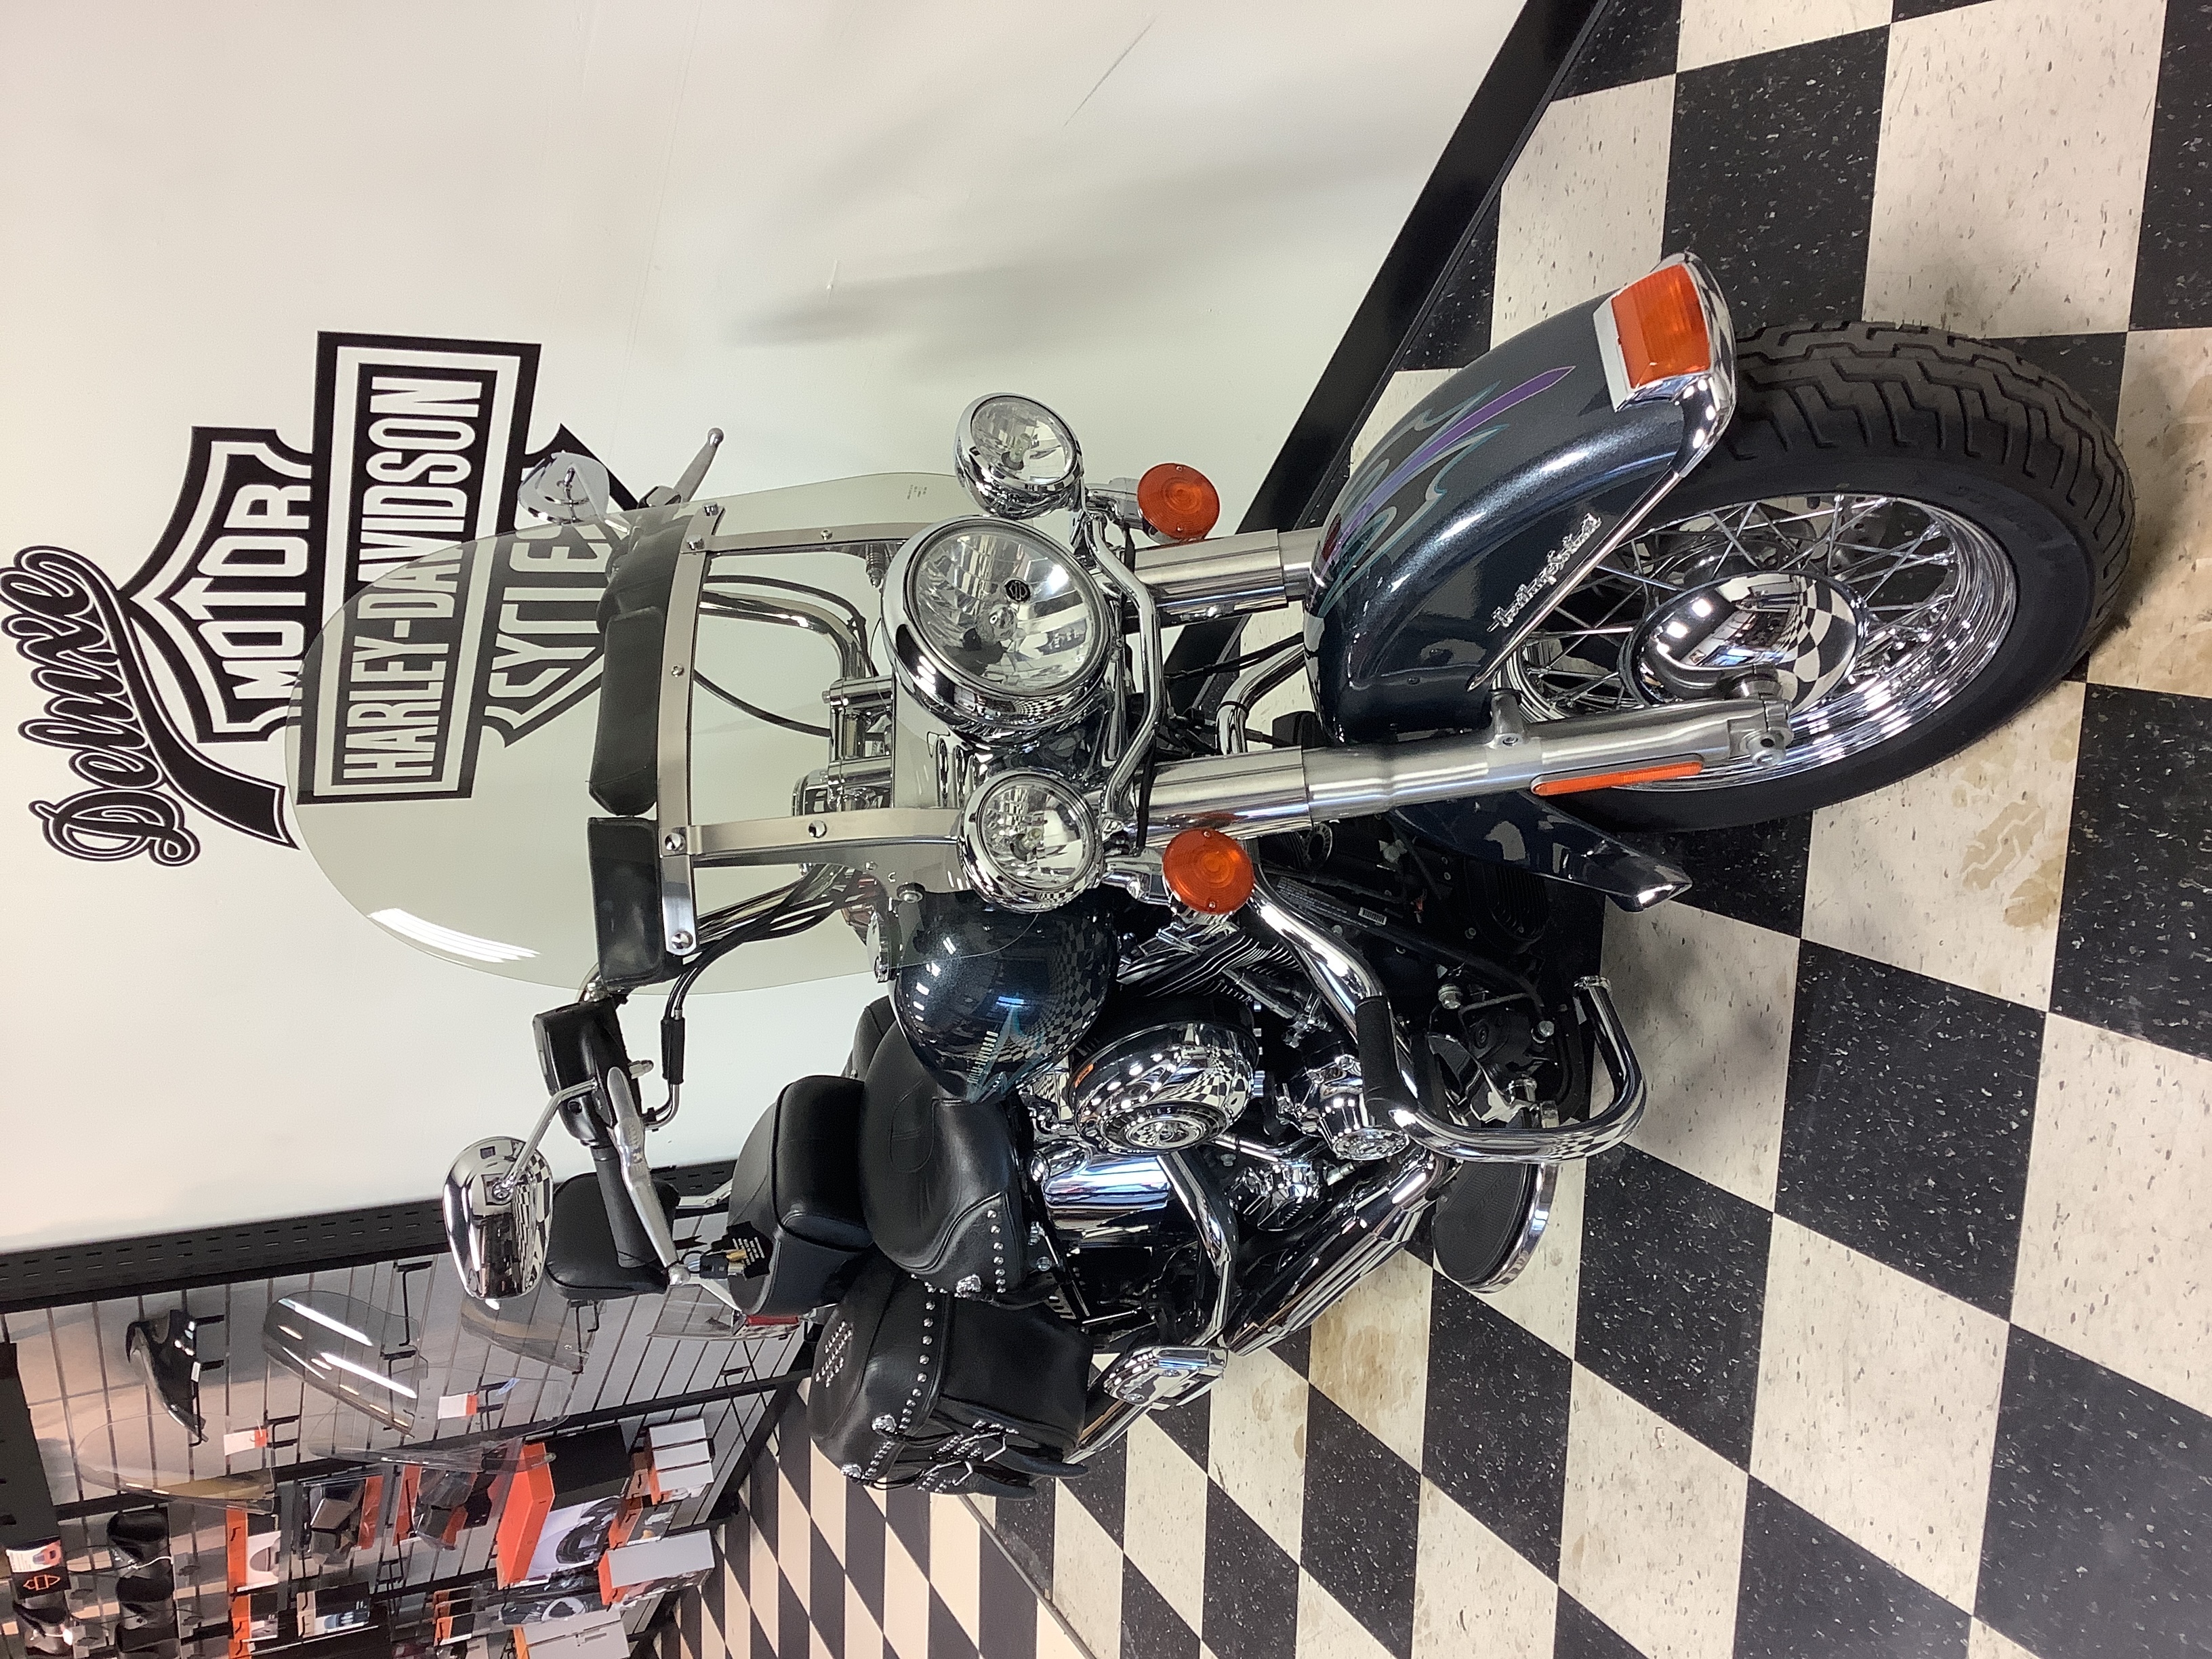 2015 Harley-Davidson Softail Heritage Softail Classic at Deluxe Harley Davidson